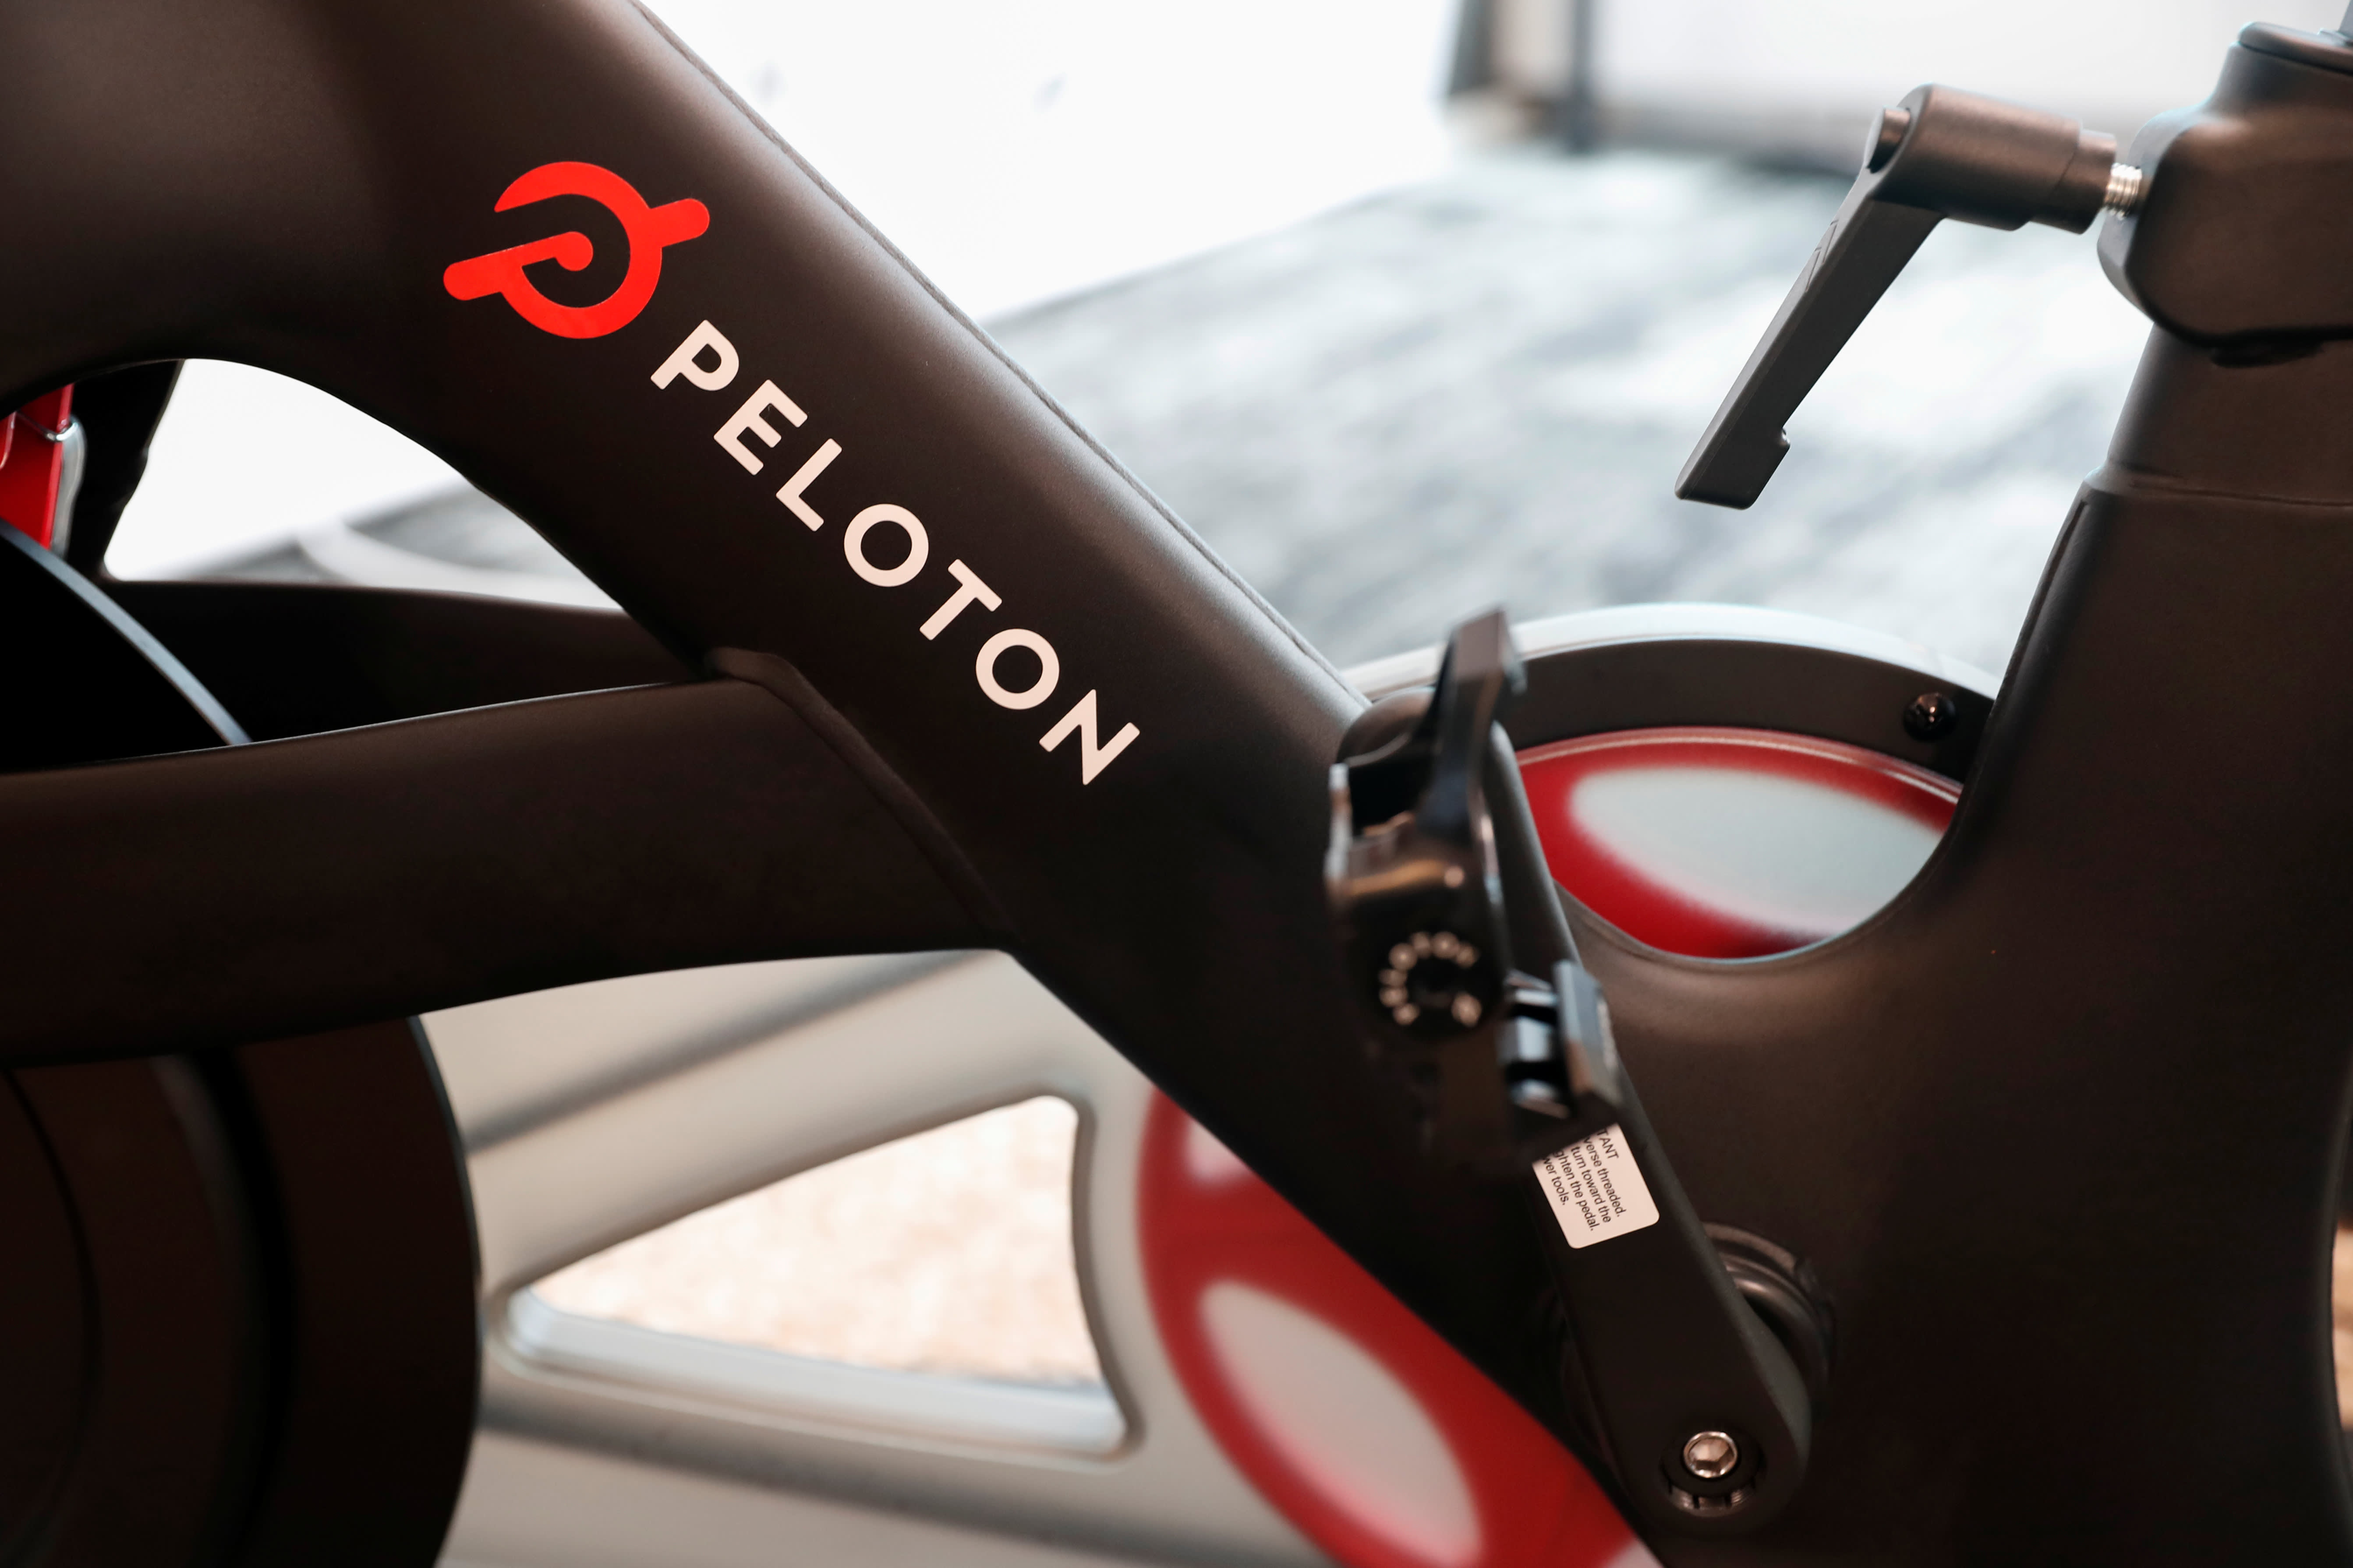 Peloton shares up after CEO says it must ‘right-size’ production levels, consider layoffs